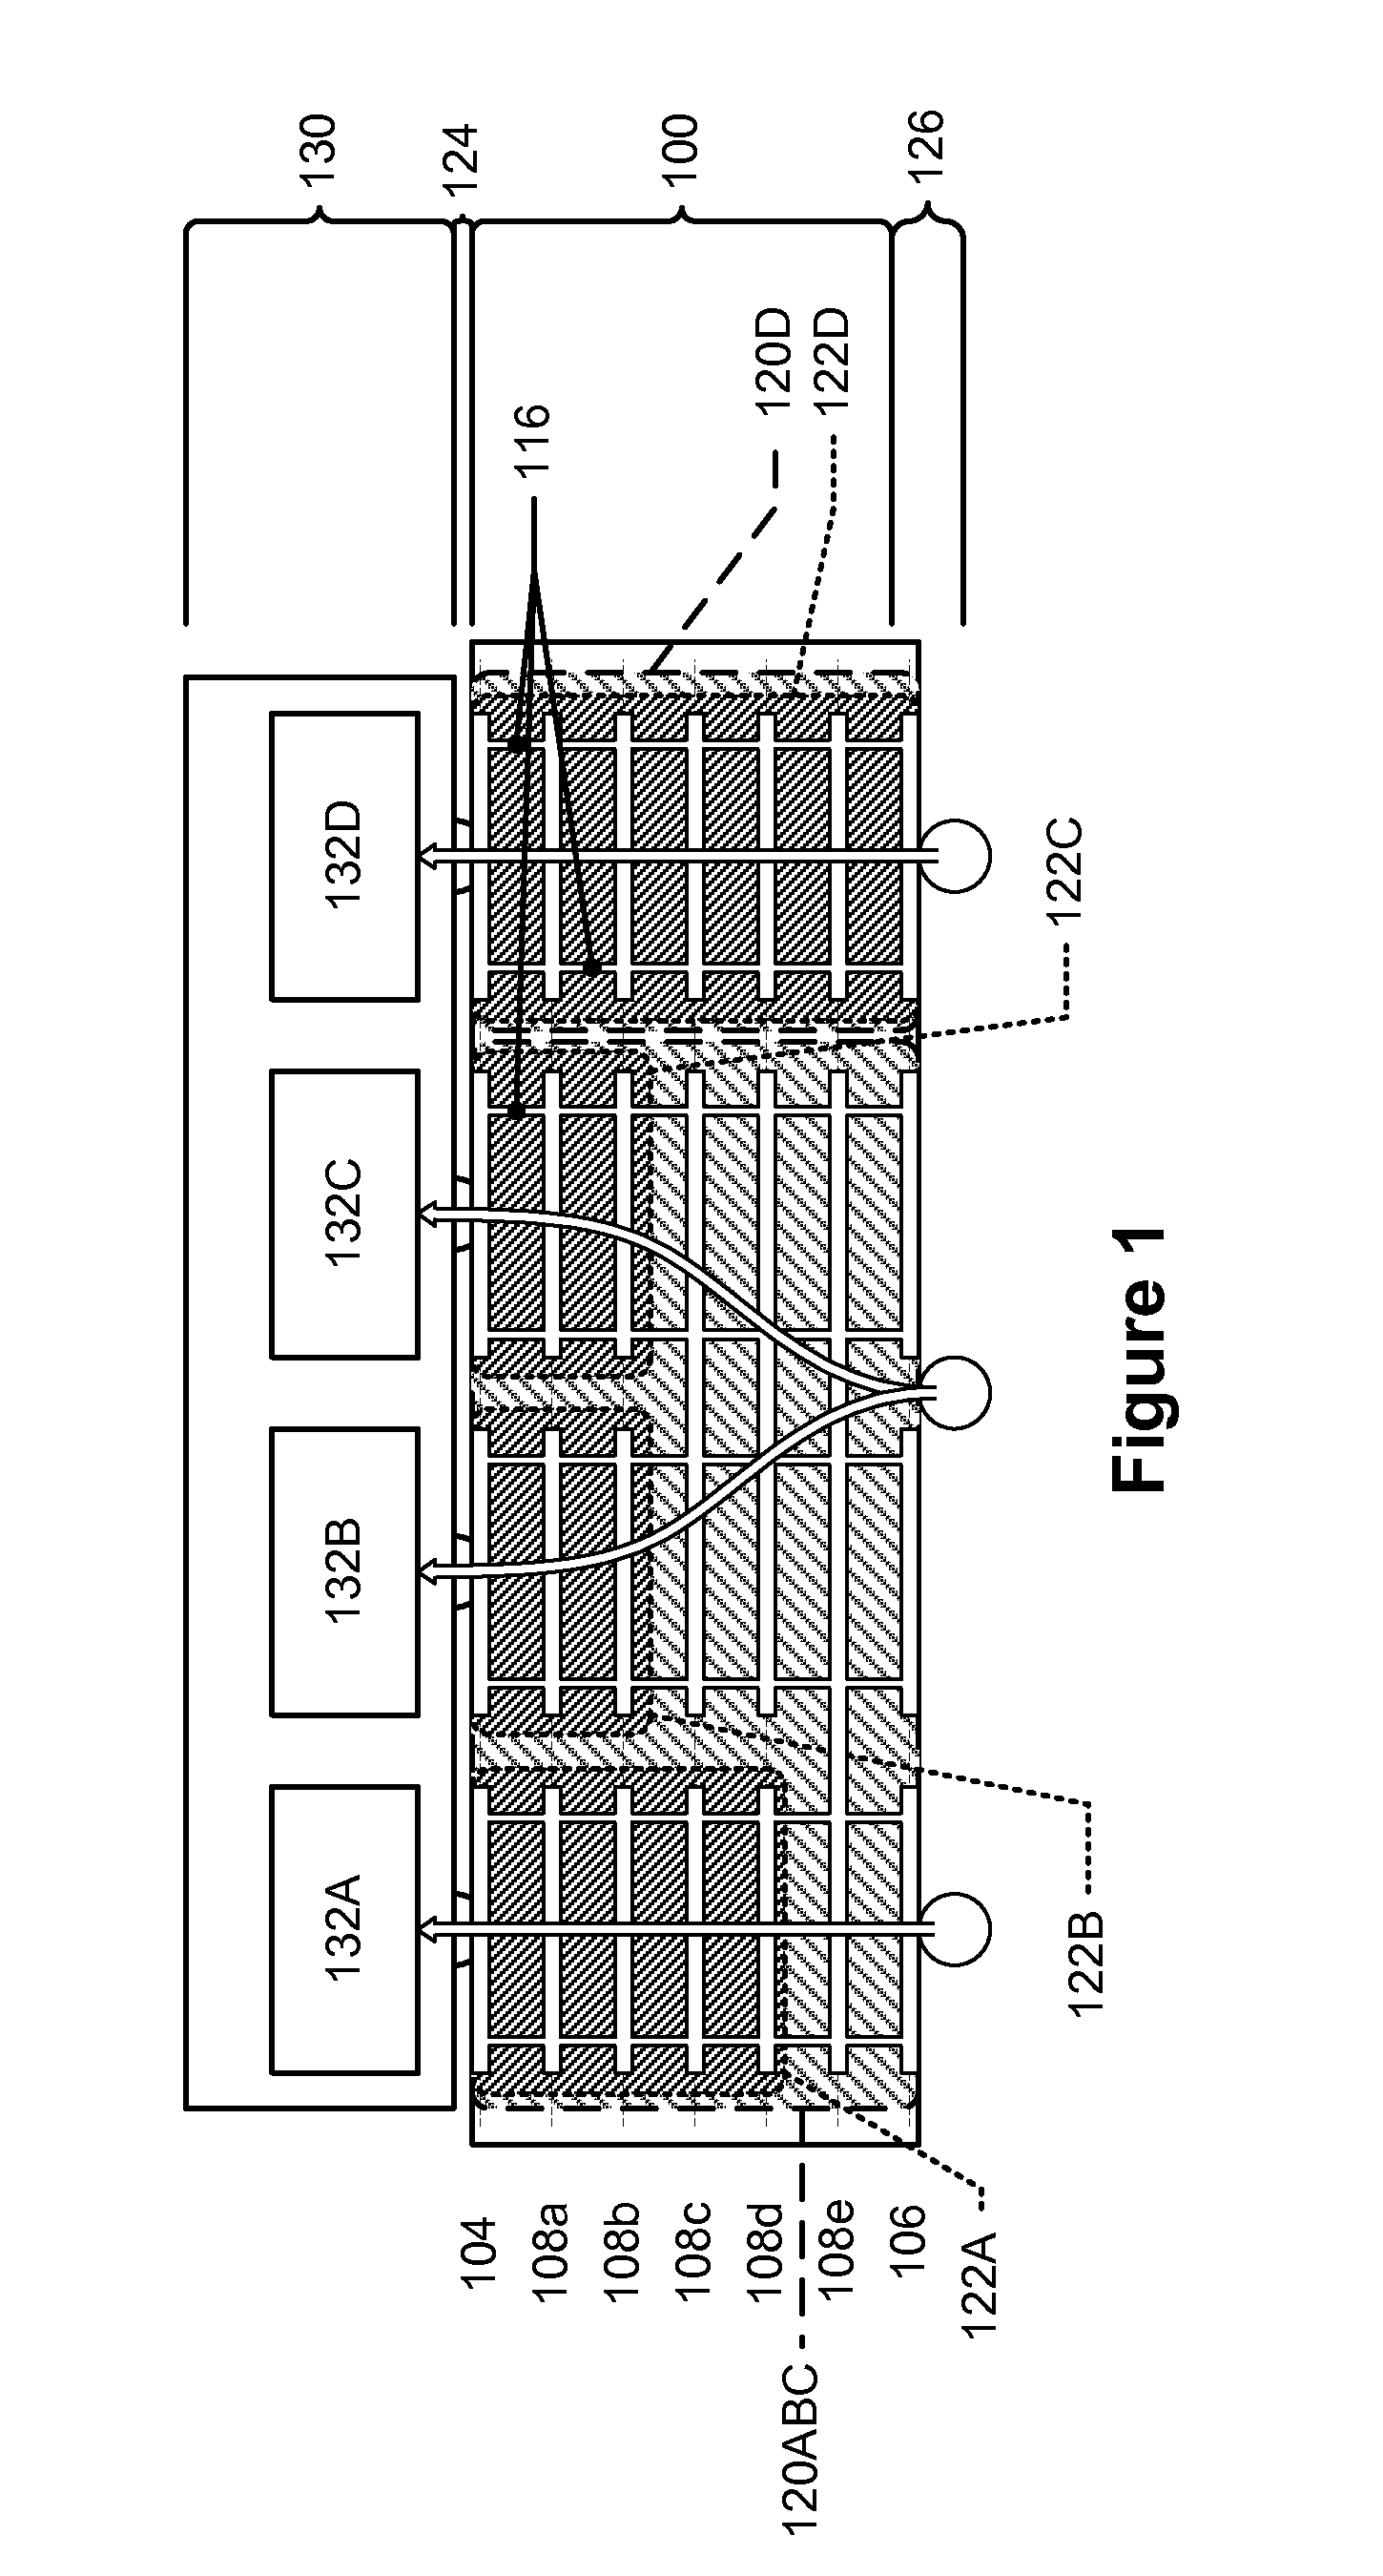 Package substrate with current flow shaping features